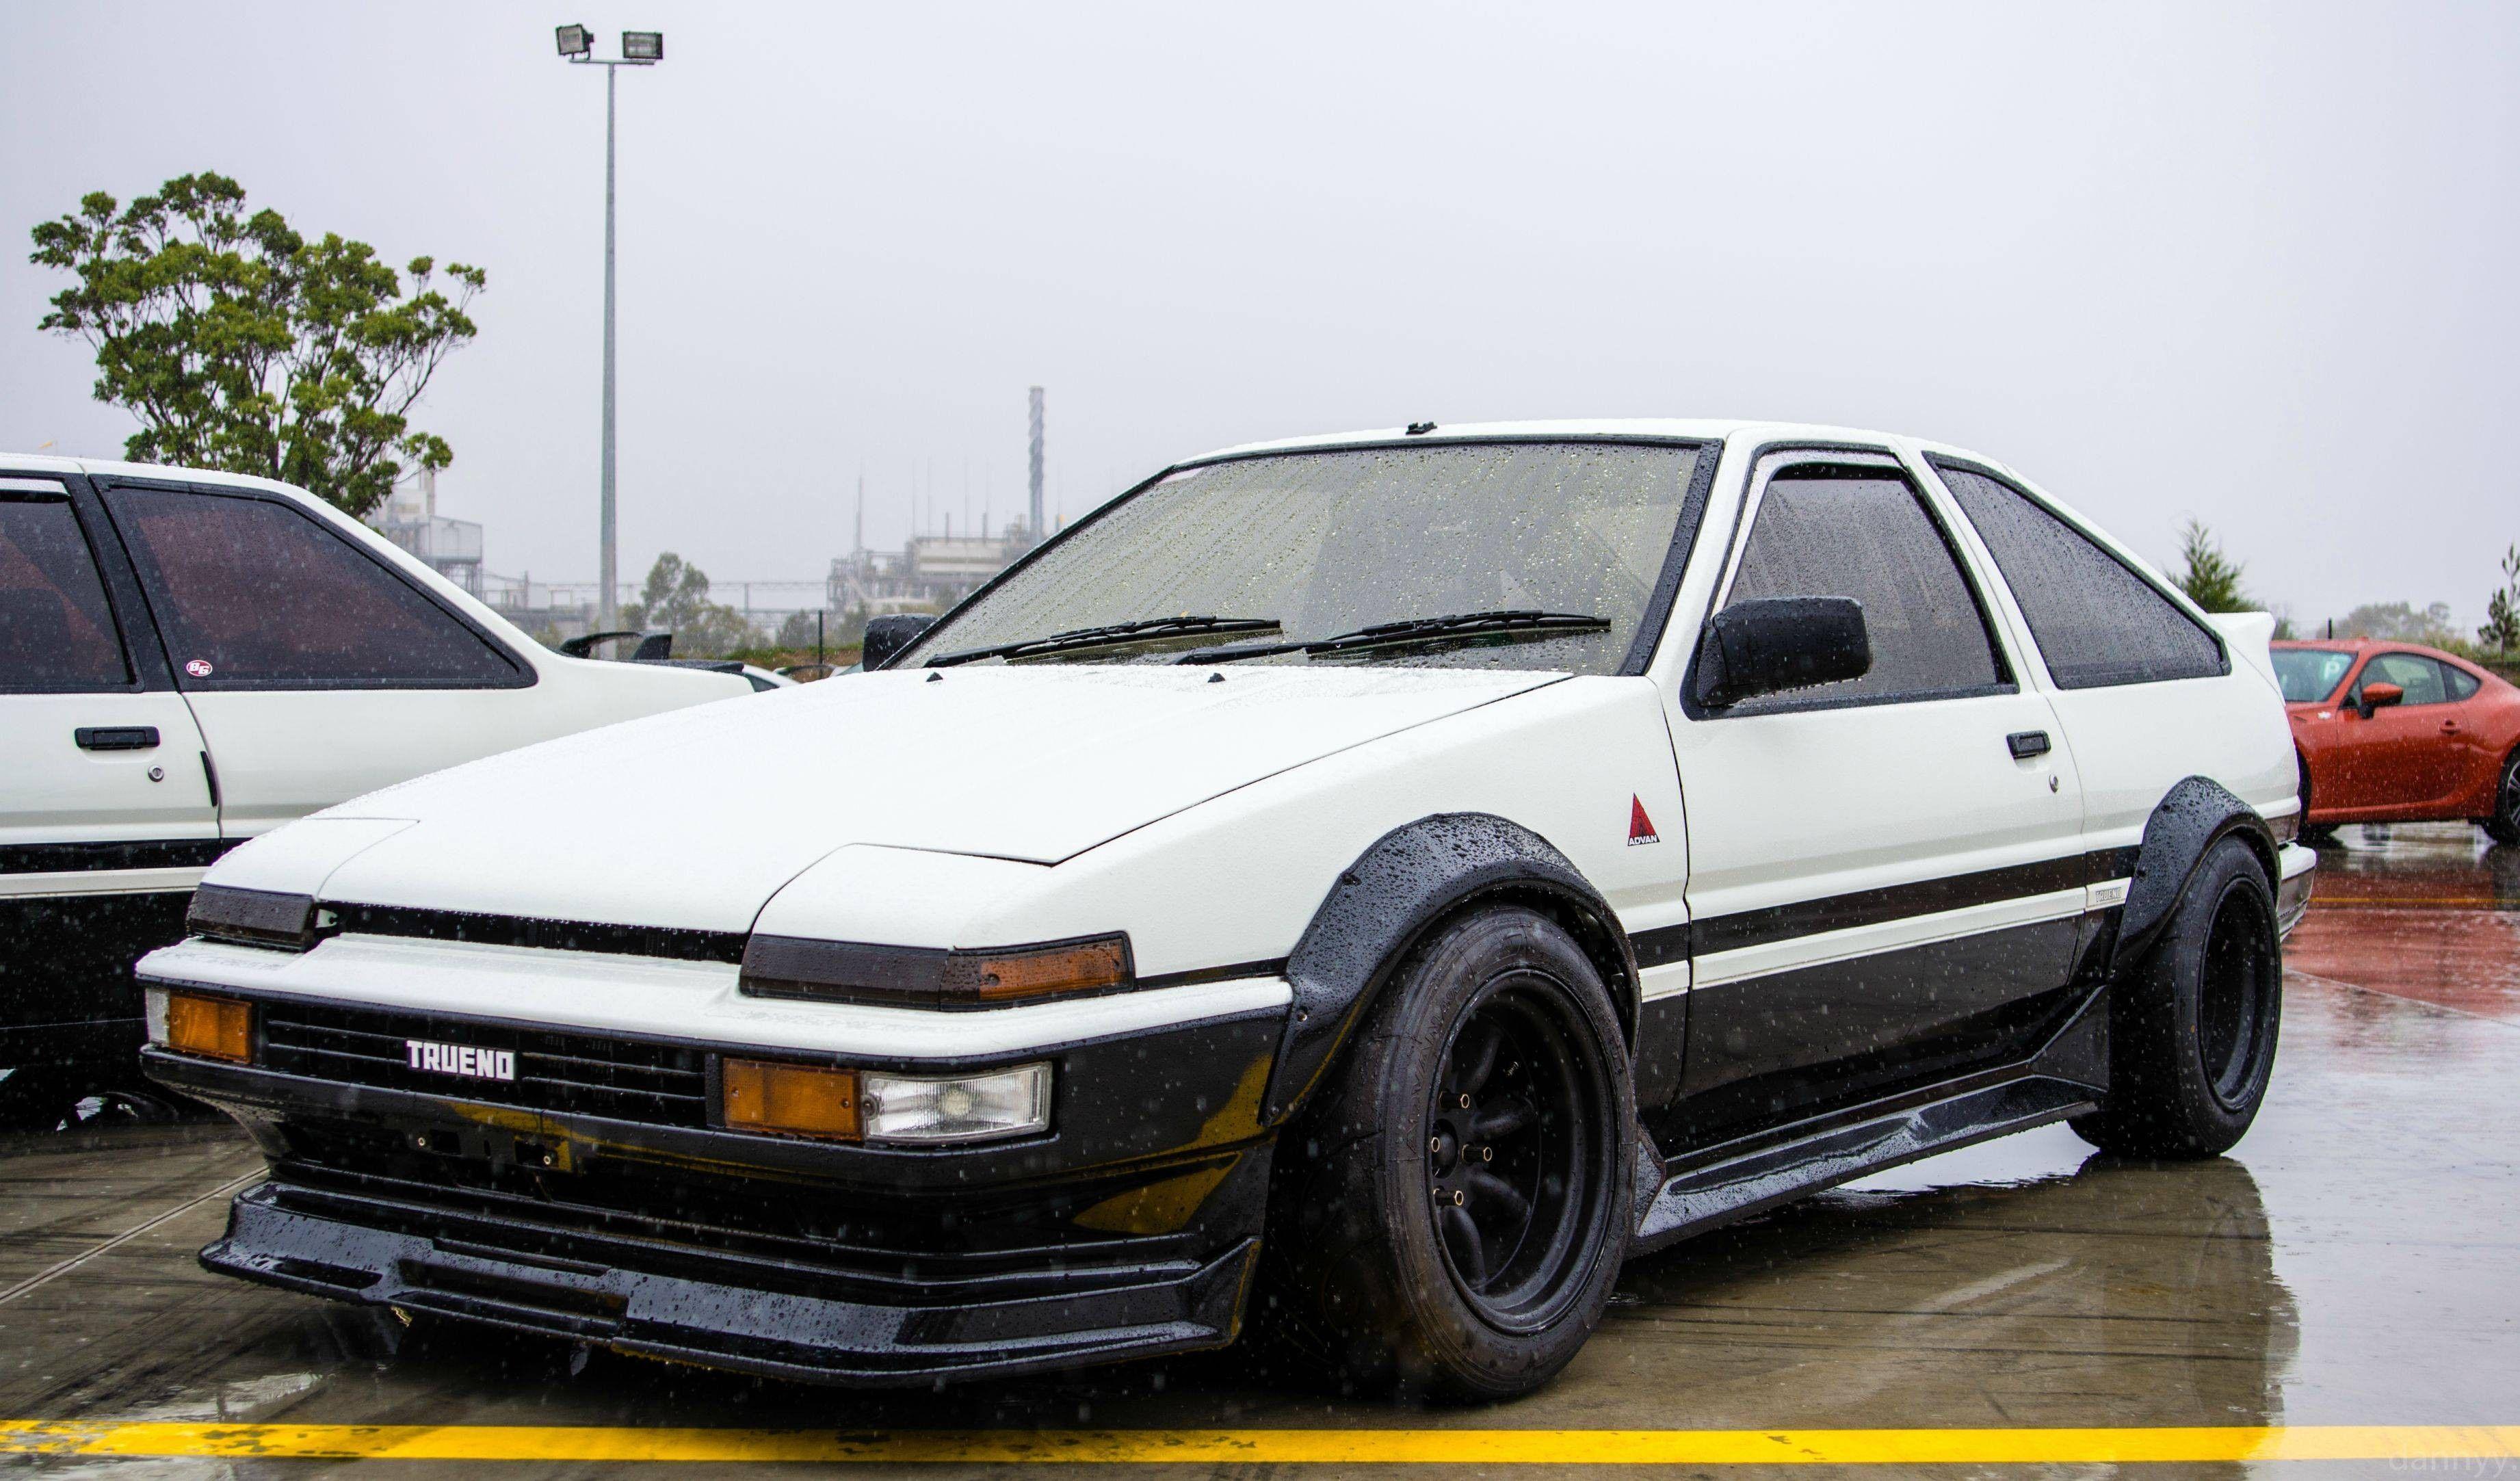 Free download Toyota AE86 Wallpaper Top Free Toyota AE86 Background [3684x2165] for your Desktop, Mobile & Tablet. Explore Toyota Sprinter Anime Wallpaper. Toyota Celica Wallpaper, Toyota Supra Wallpaper, Toyota Tacoma Wallpaper